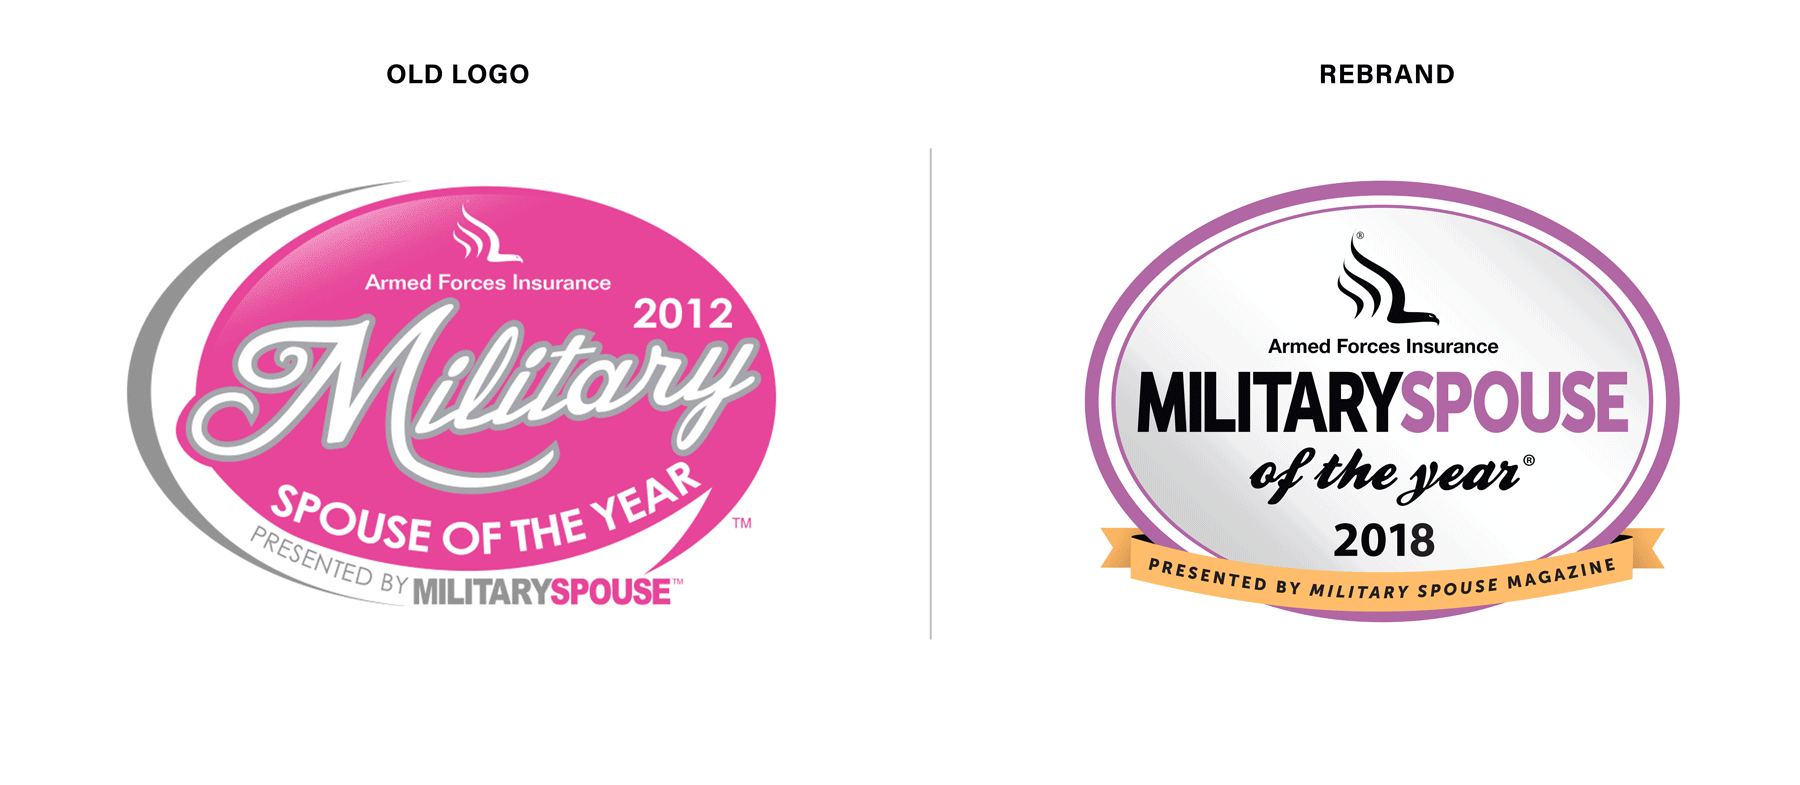 Armed Forces Insurance Military Spouse of the Year Logo Maiocco Design Co.